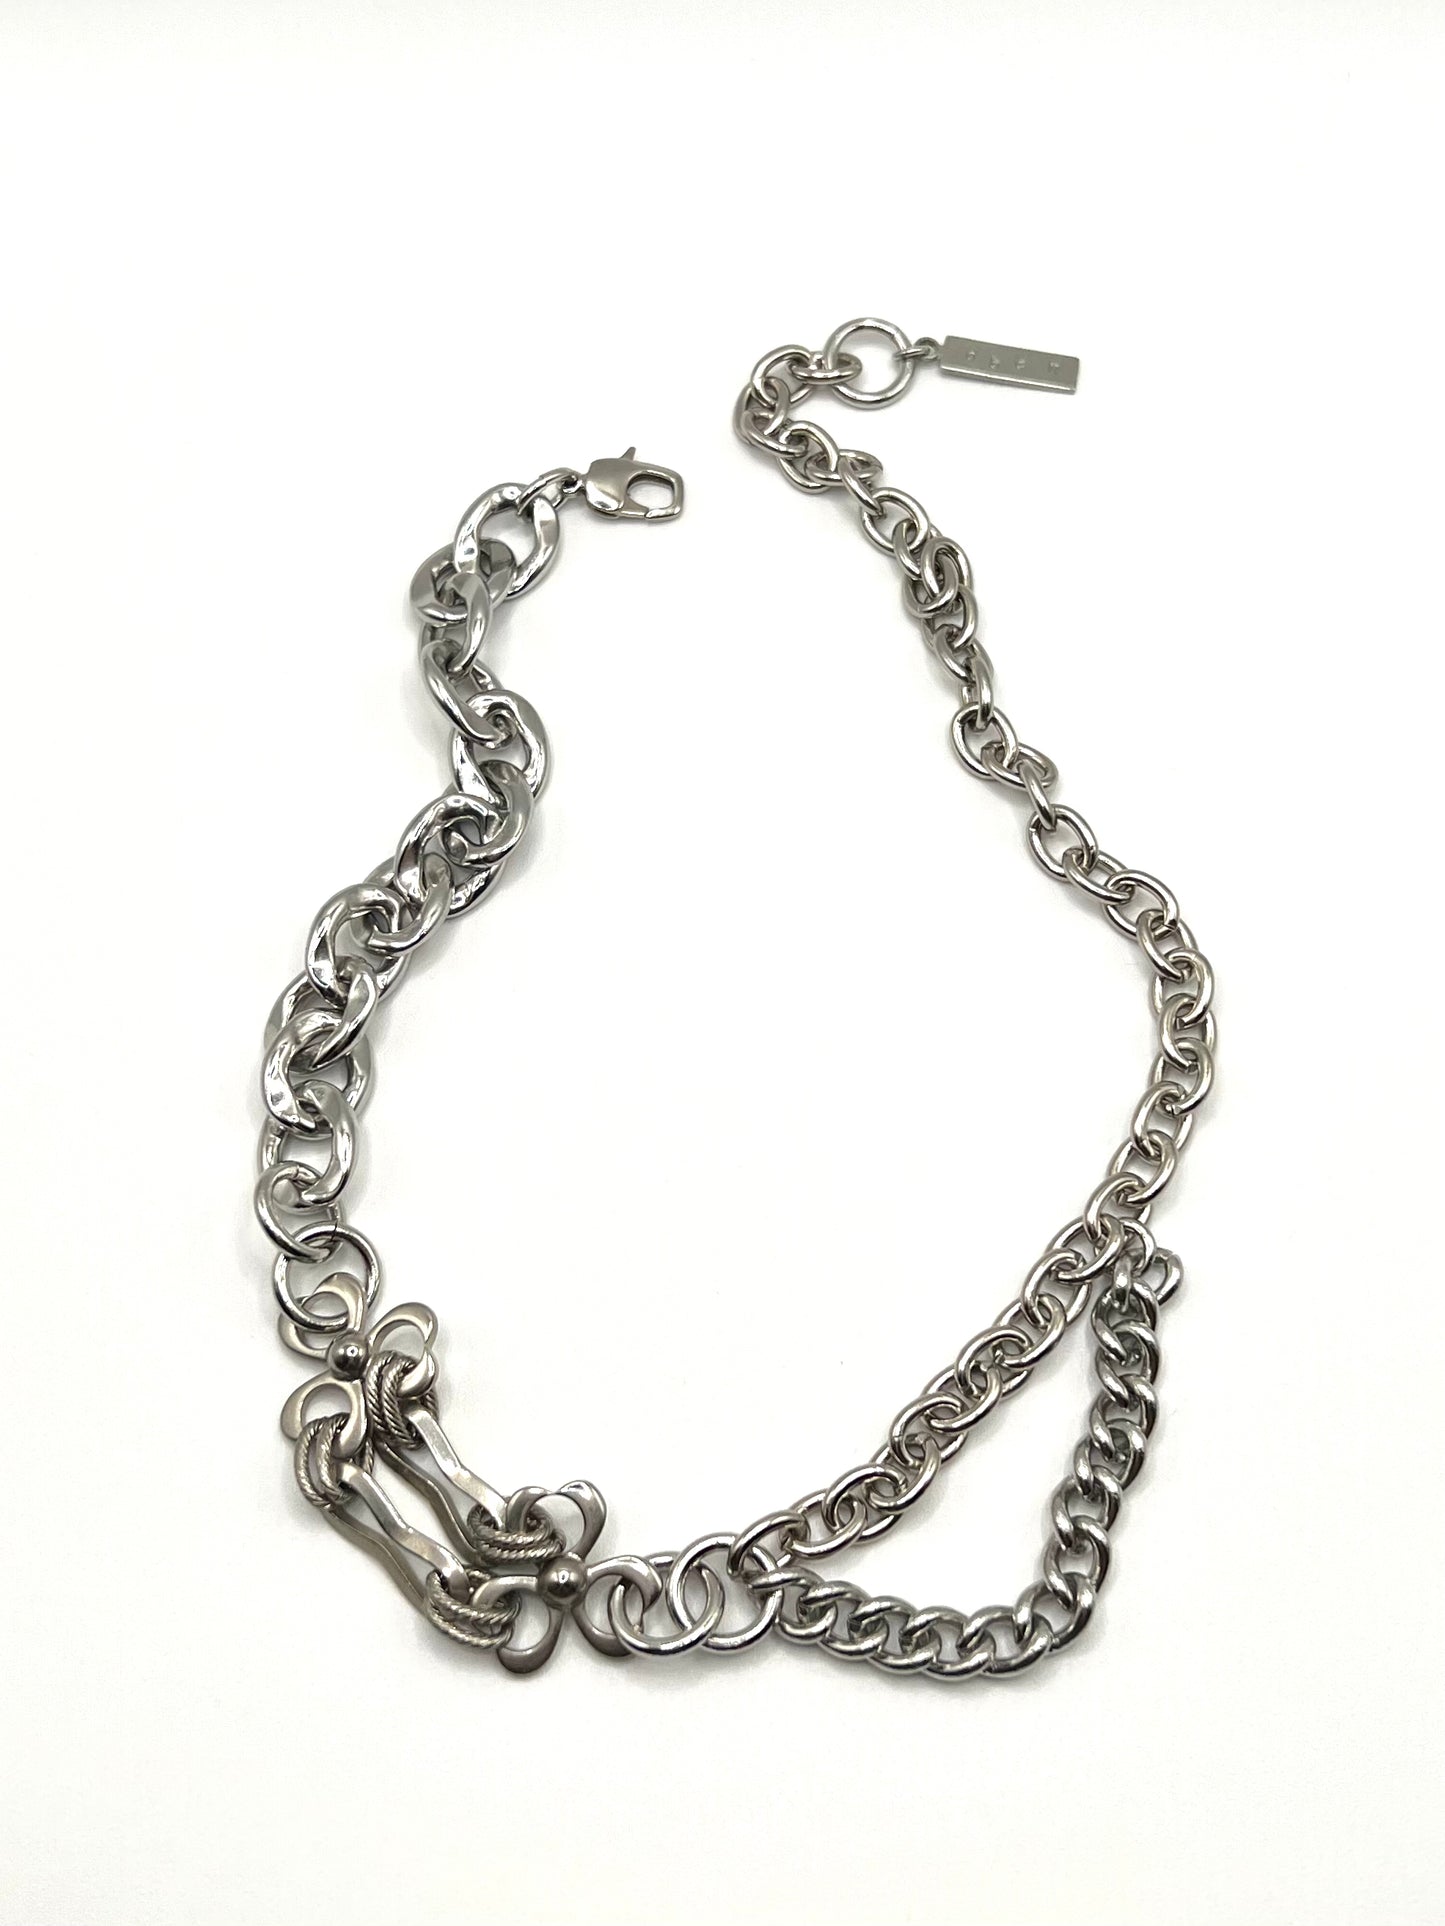 Chain combination necklace - B